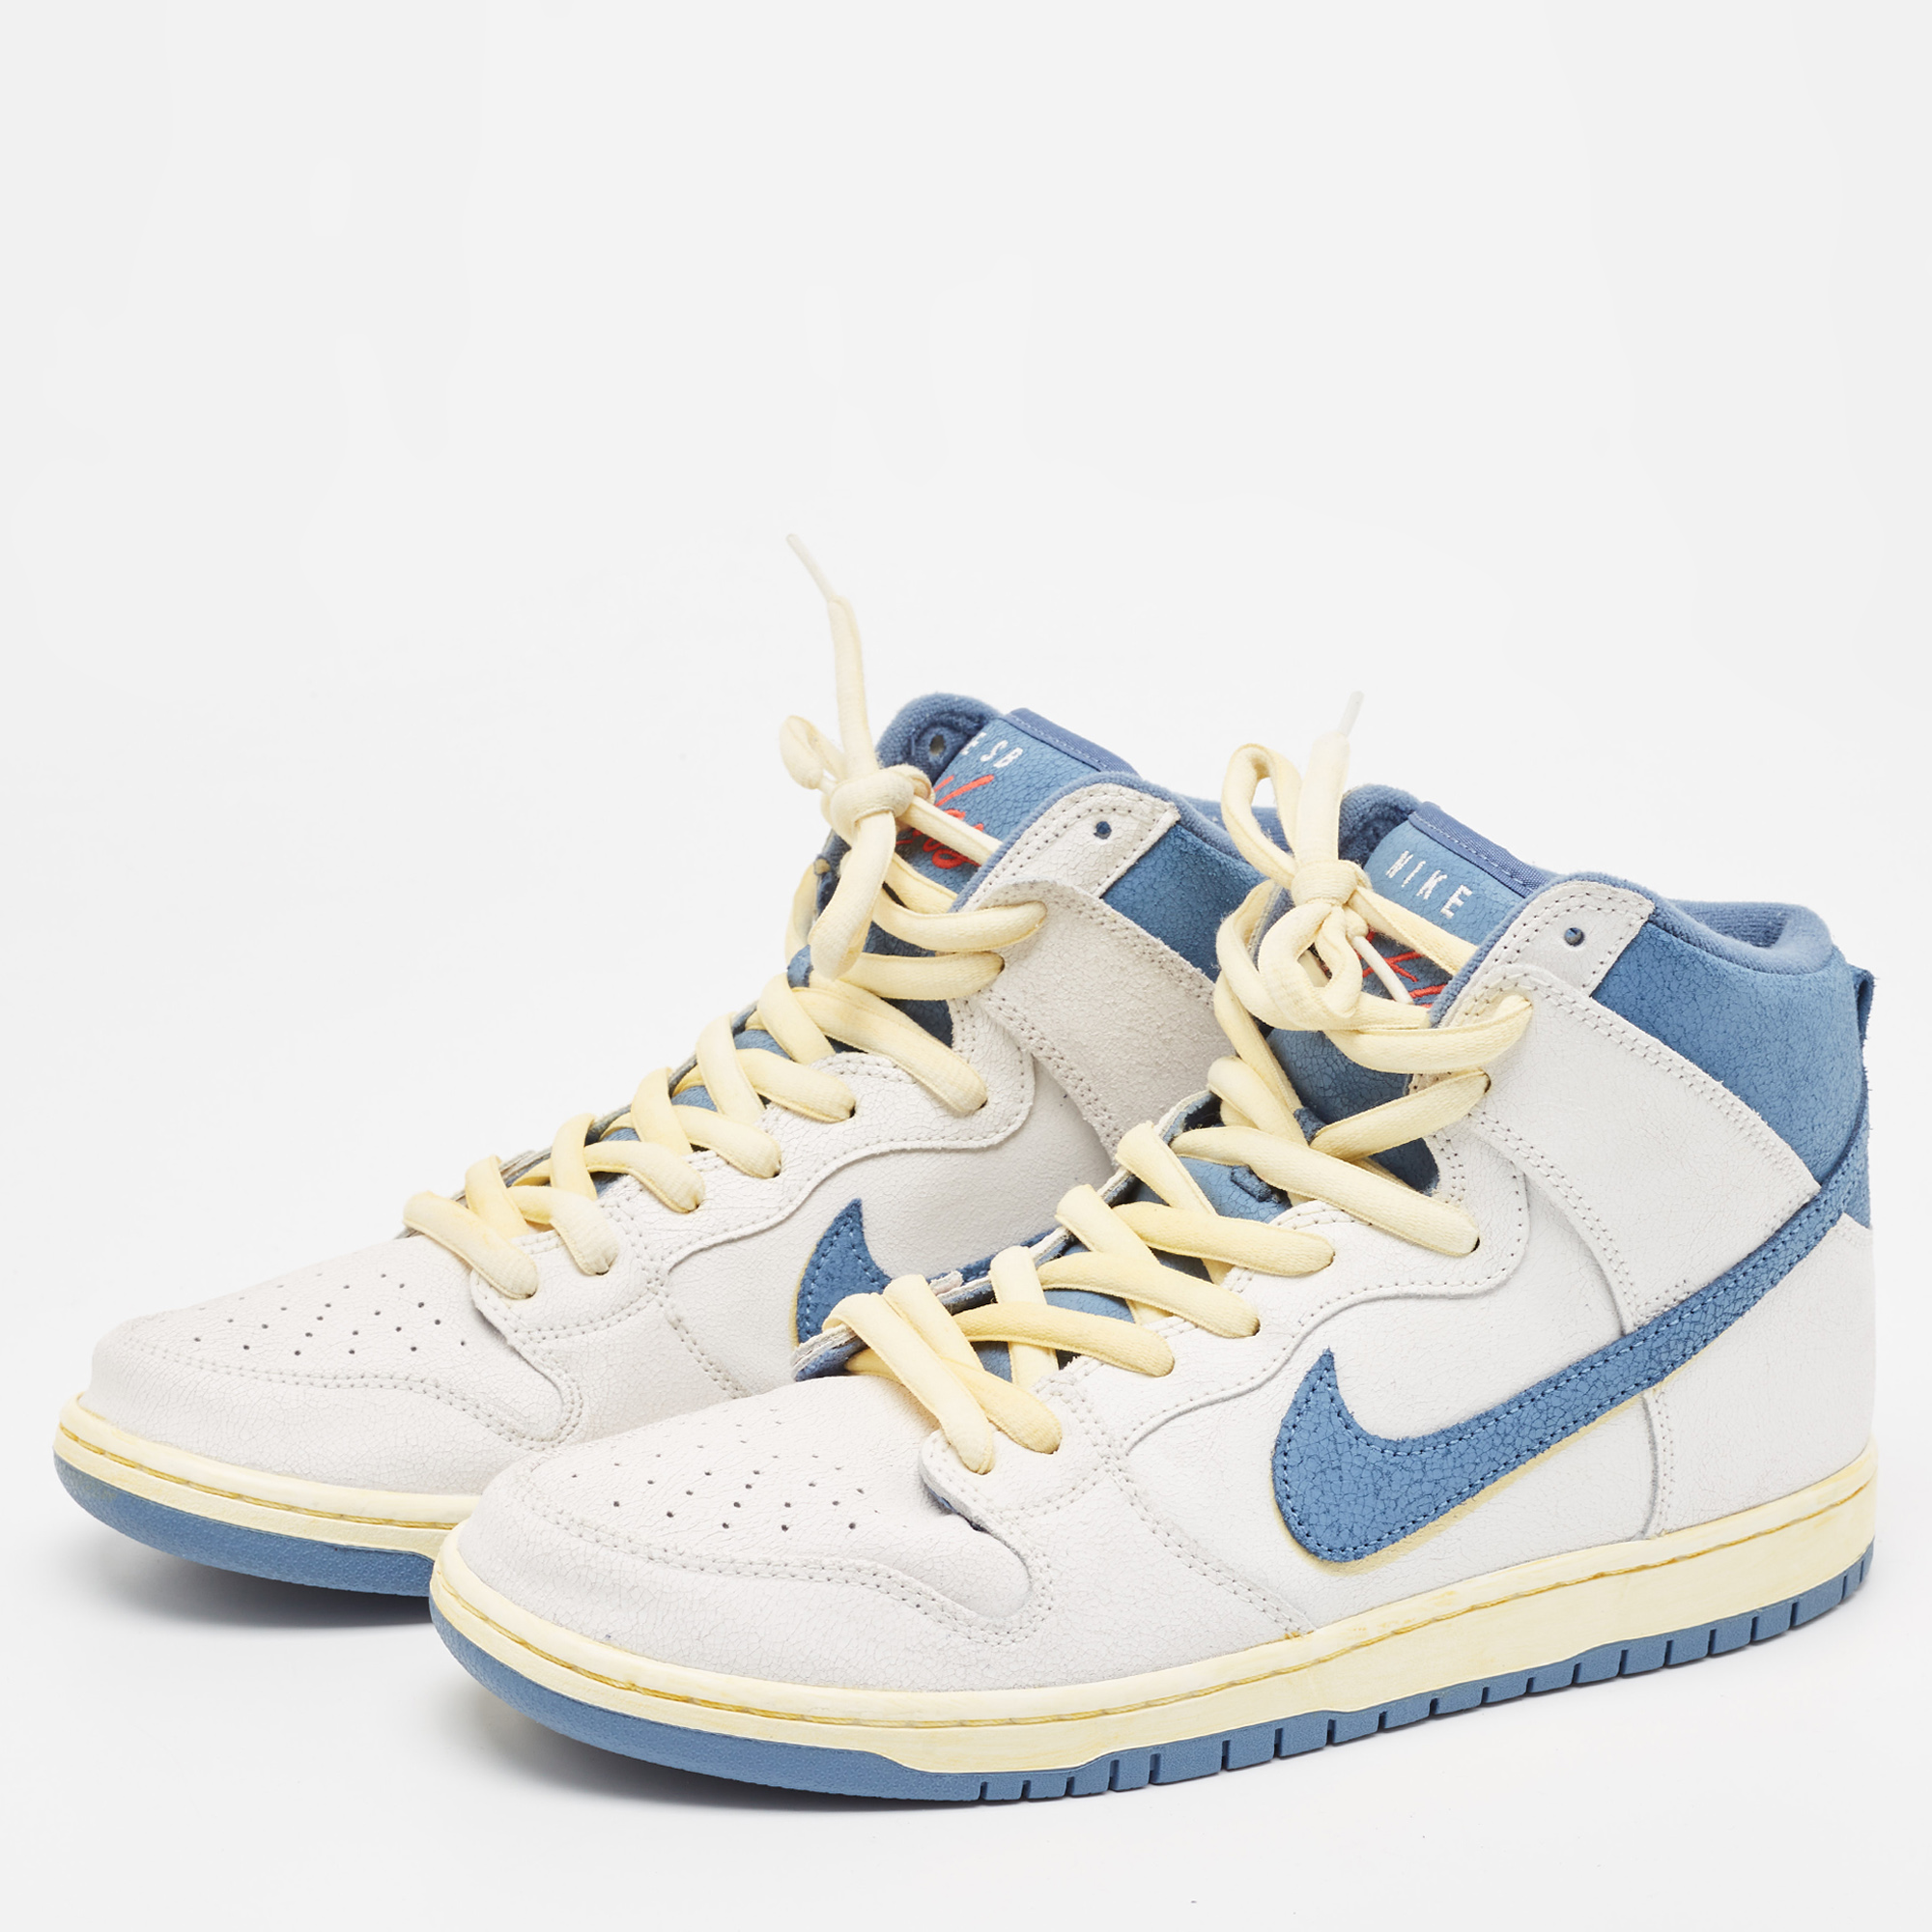 

Nike SB Dunk White/Blue Leather Atlas Lost High Sneakers Size